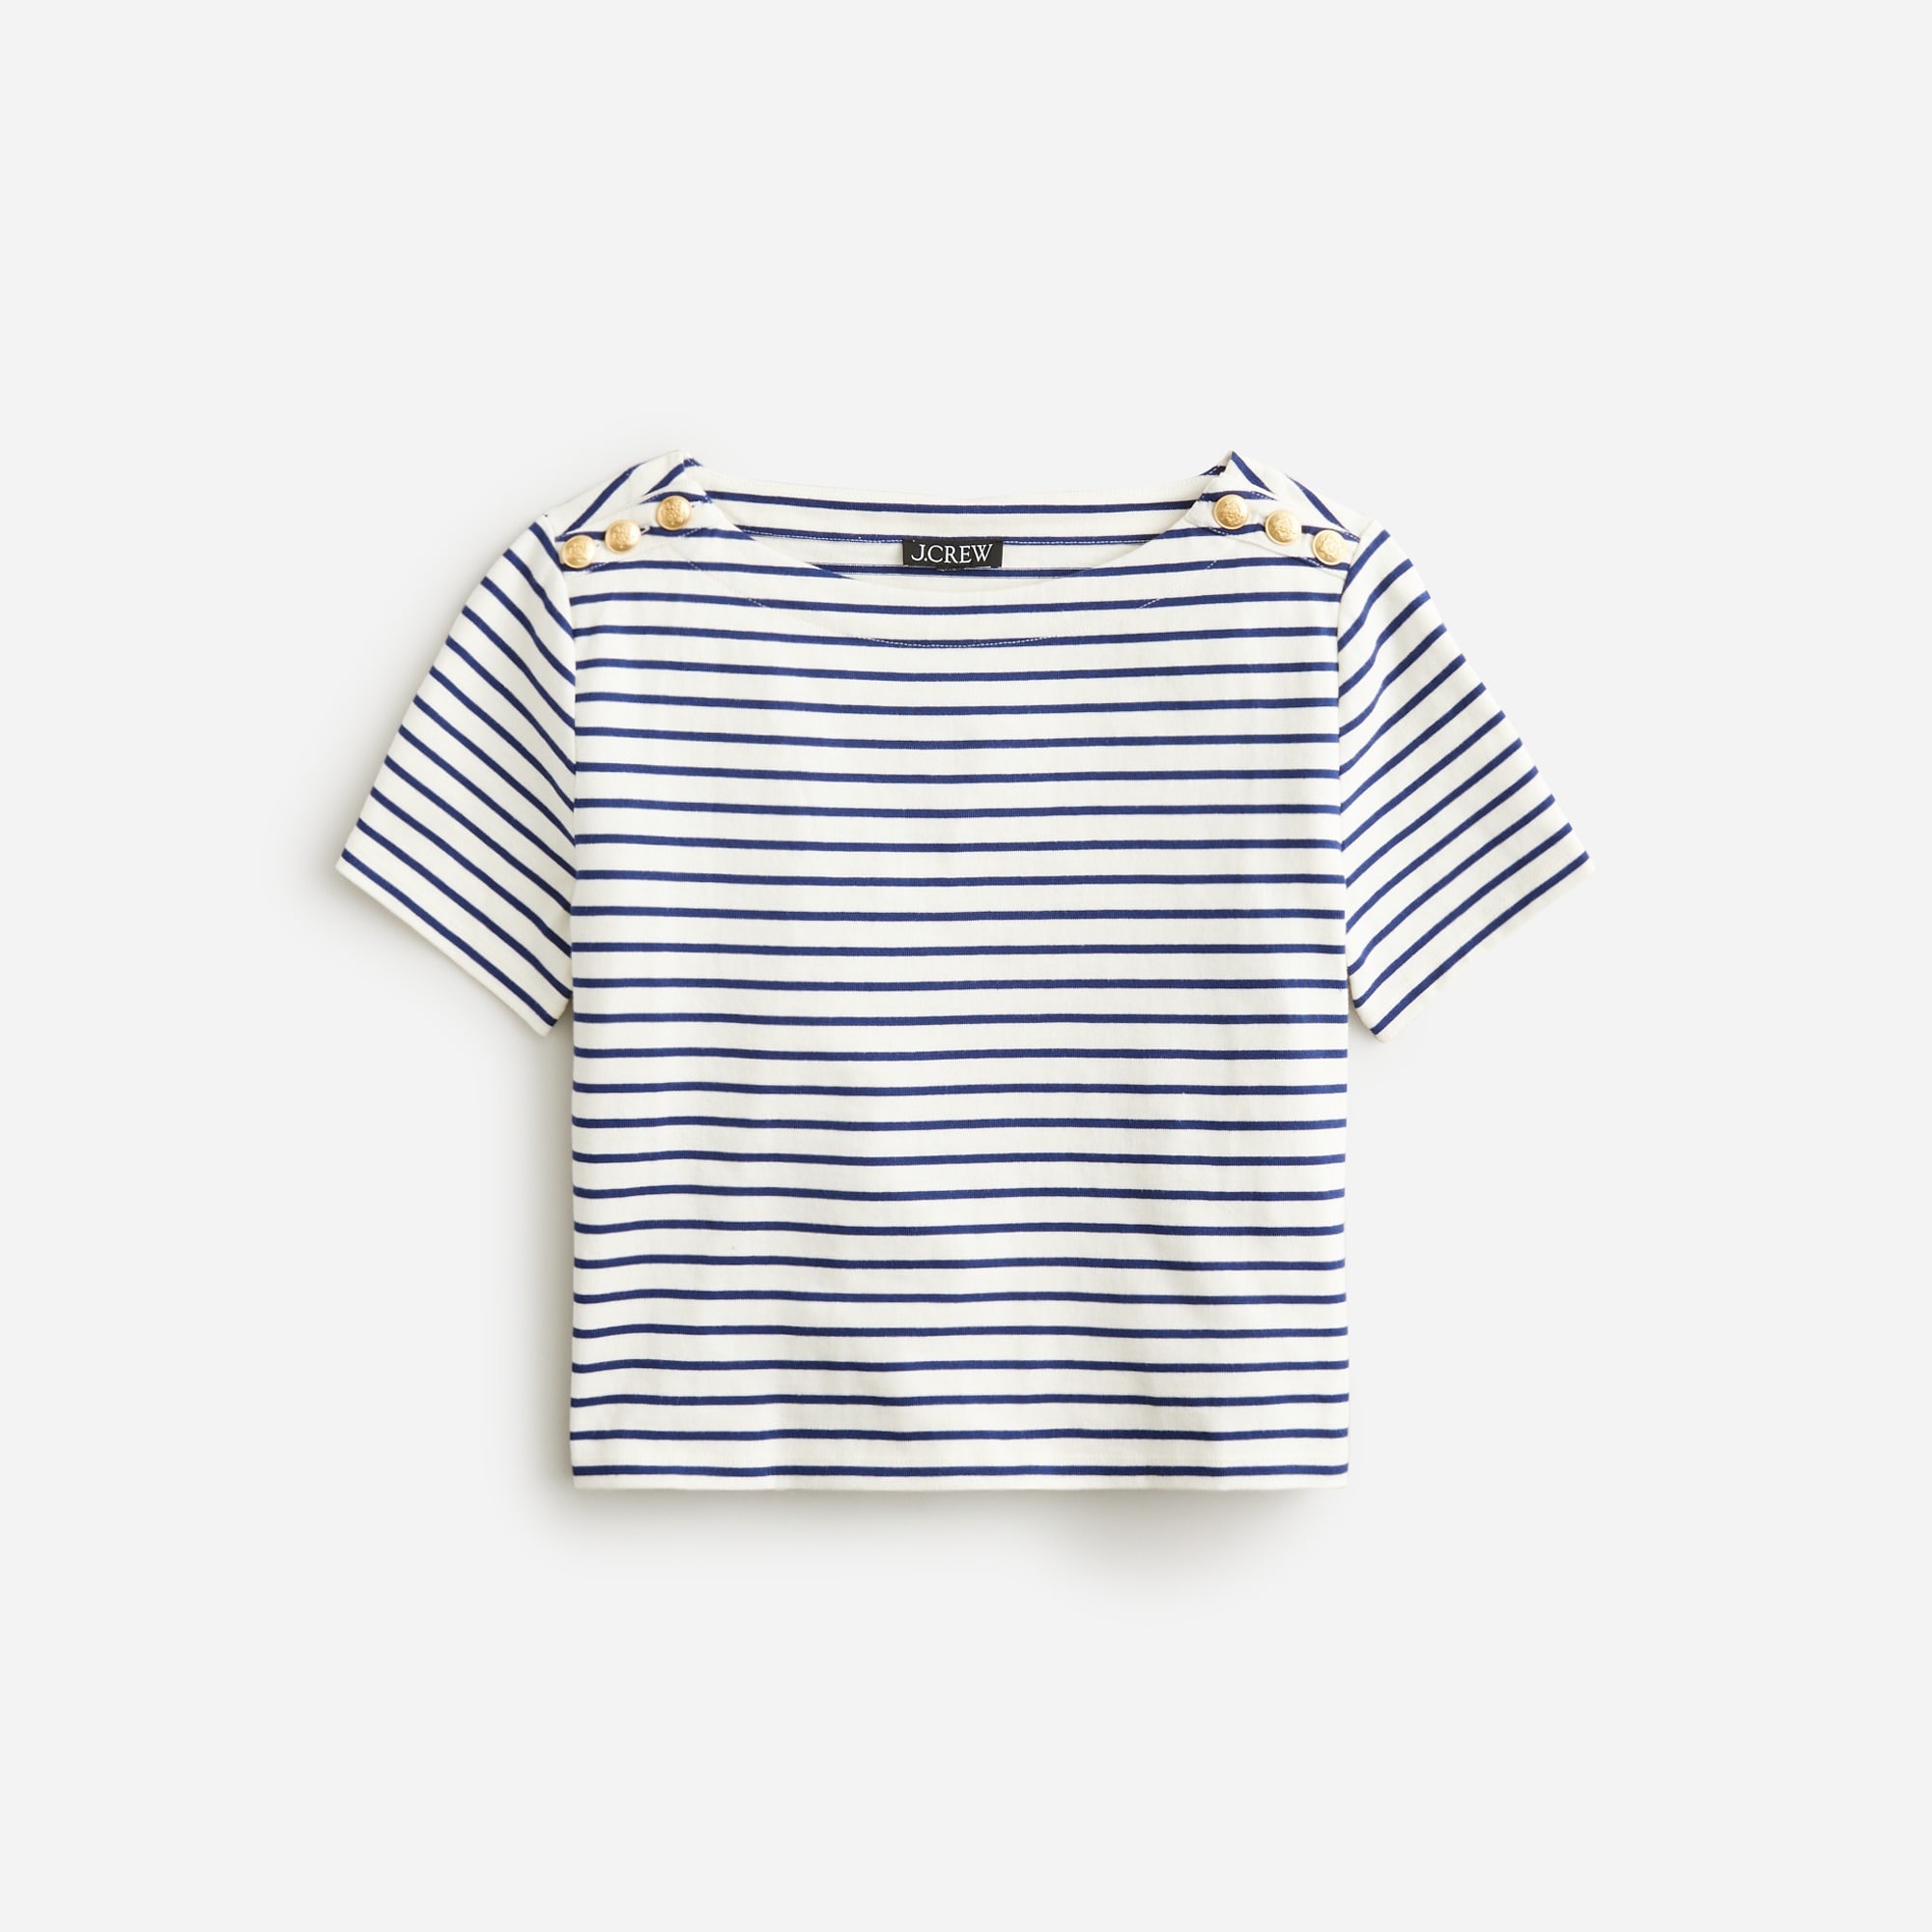  Mariner cloth short-sleeve T-shirt with buttons in stripe